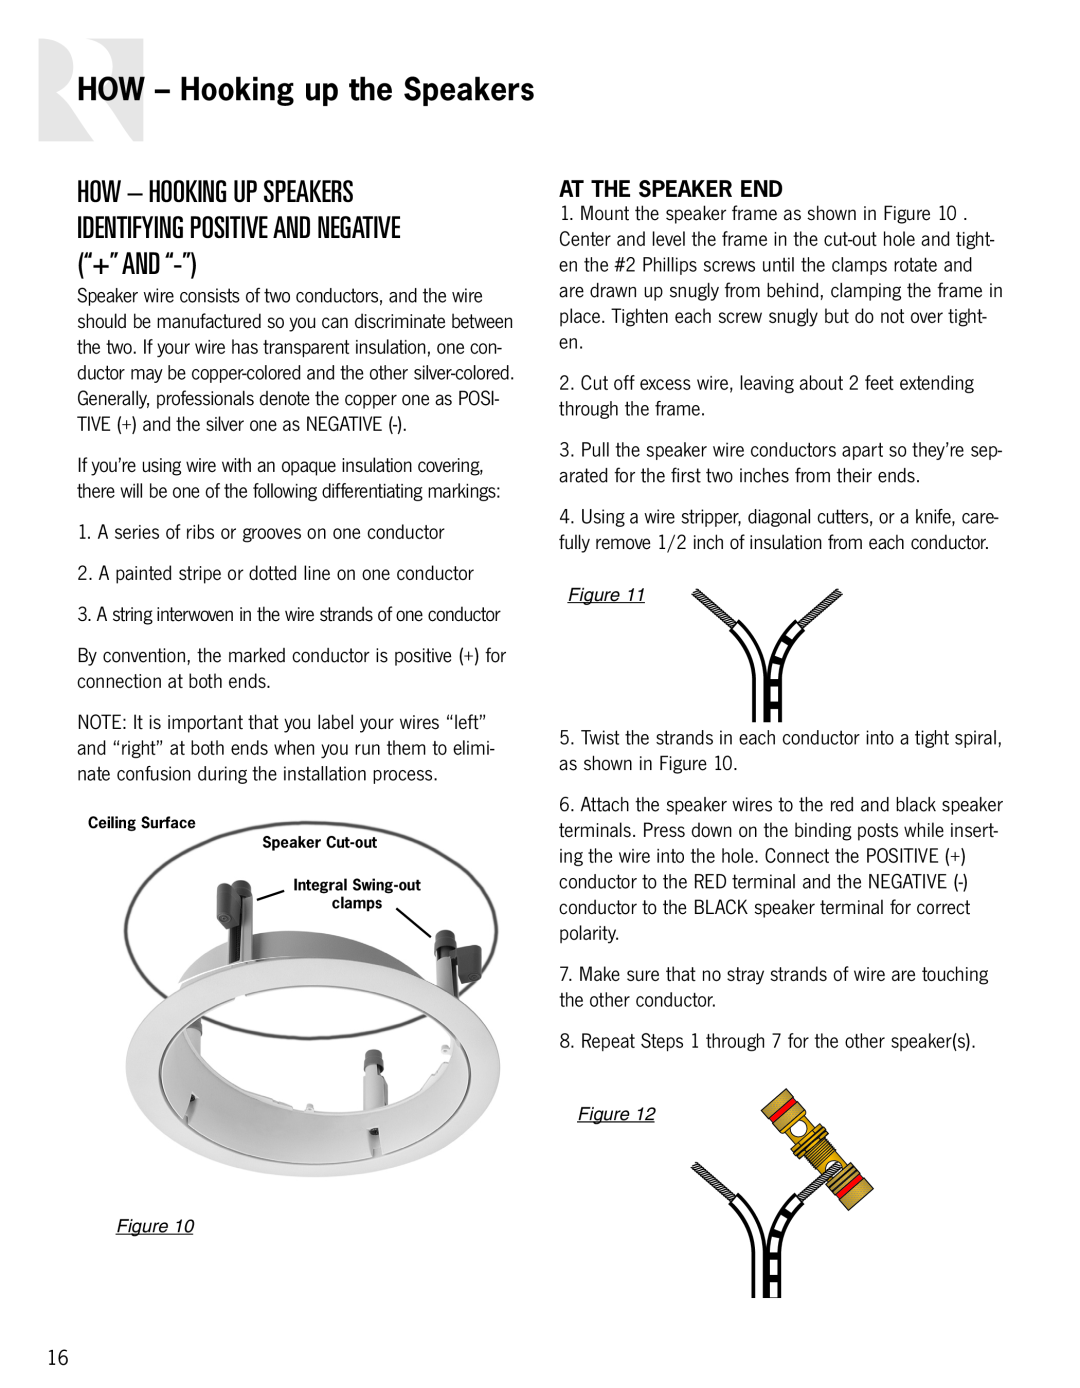 Russound In-Ceiling speaker owner manual HOW - Hooking up the Speakers, At The Speaker End 